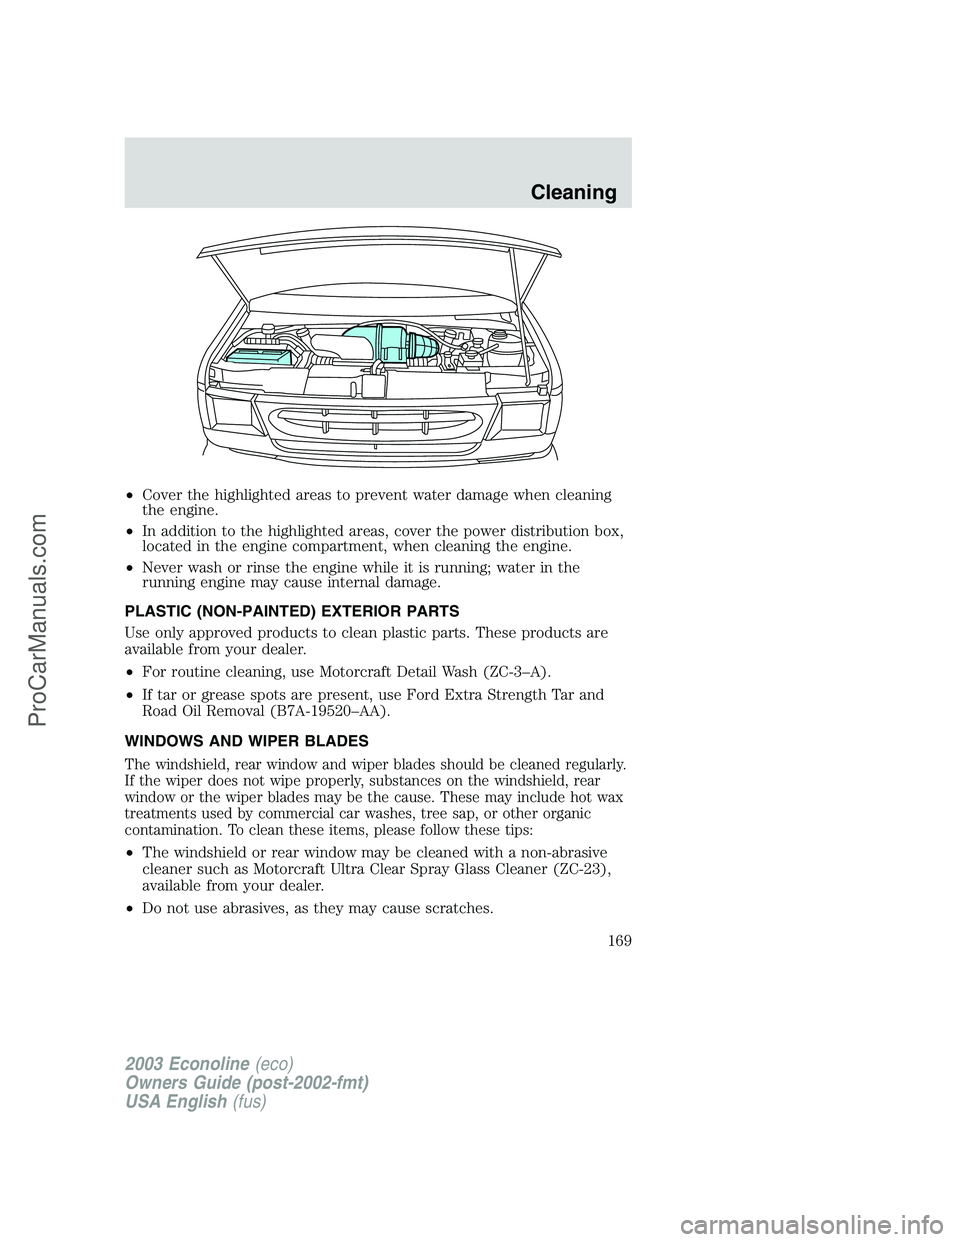 FORD E-450 2003  Owners Manual •Cover the highlighted areas to prevent water damage when cleaning
the engine.
•In addition to the highlighted areas, cover the power distribution box,
located in the engine compartment, when clea